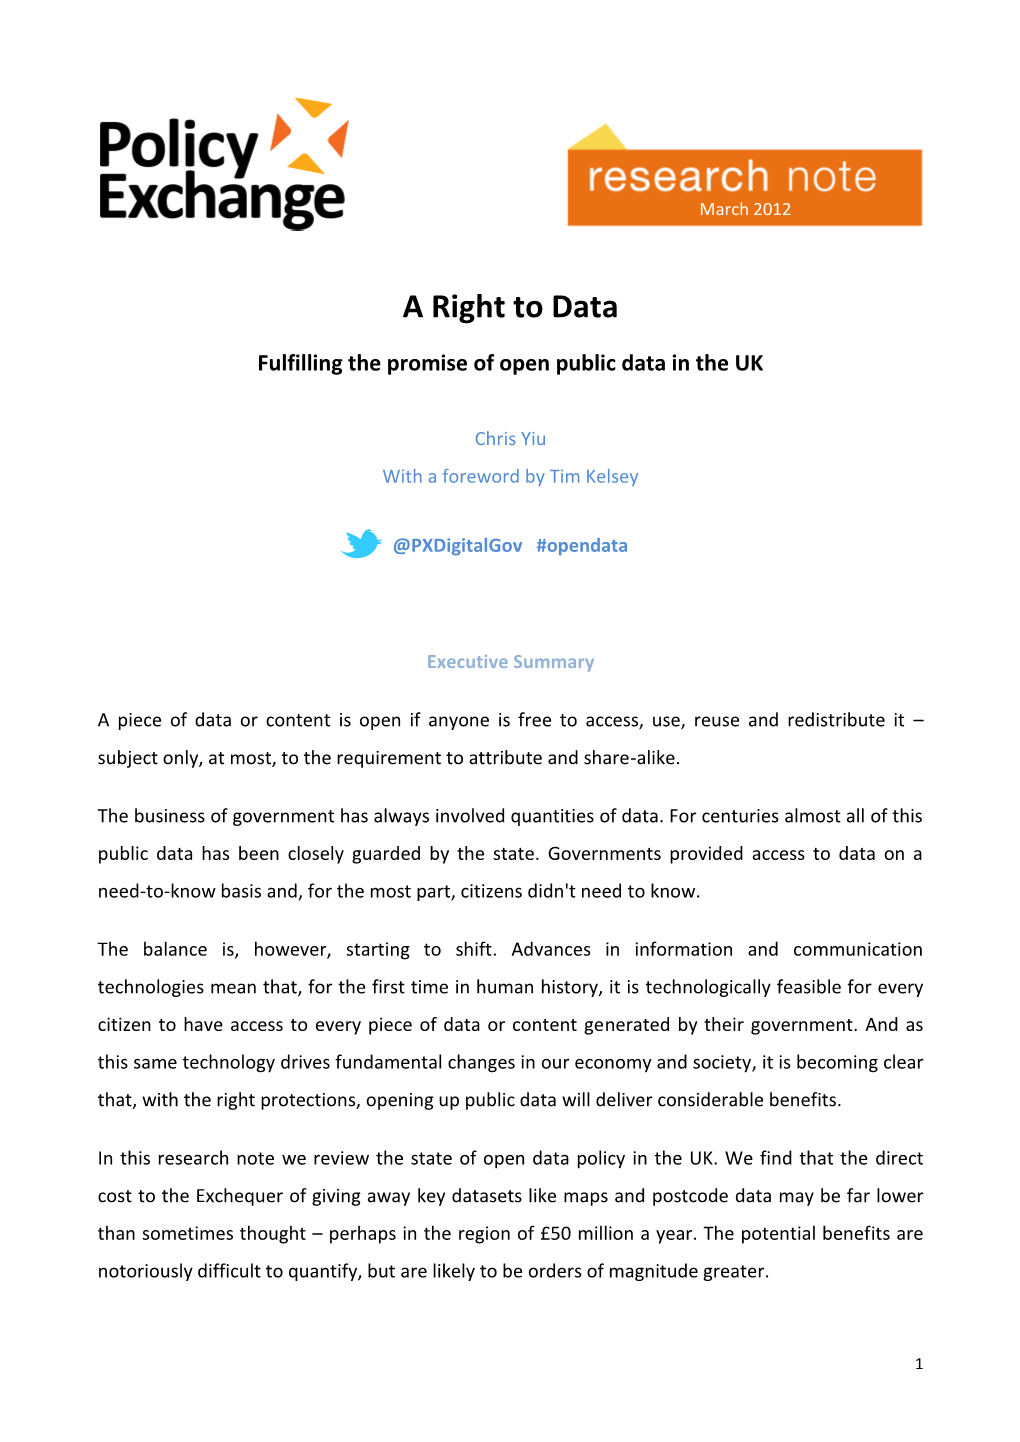 A Right to Data